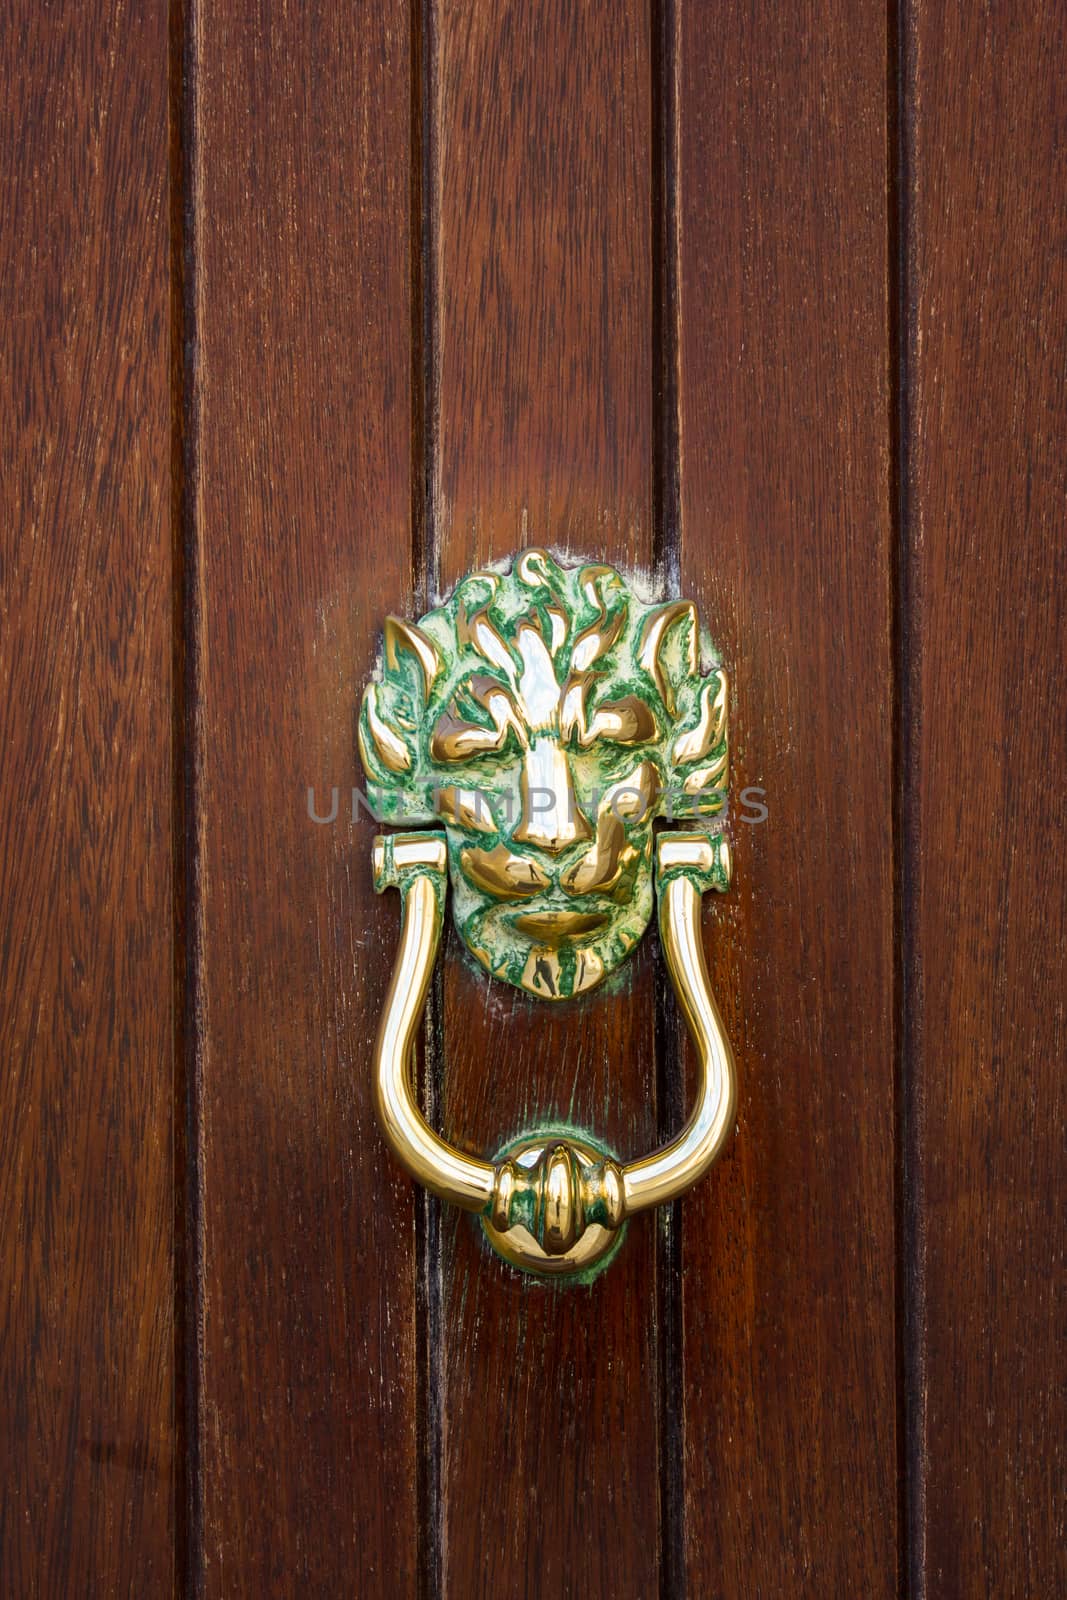 Knocker front door of the house Maltese by goghy73